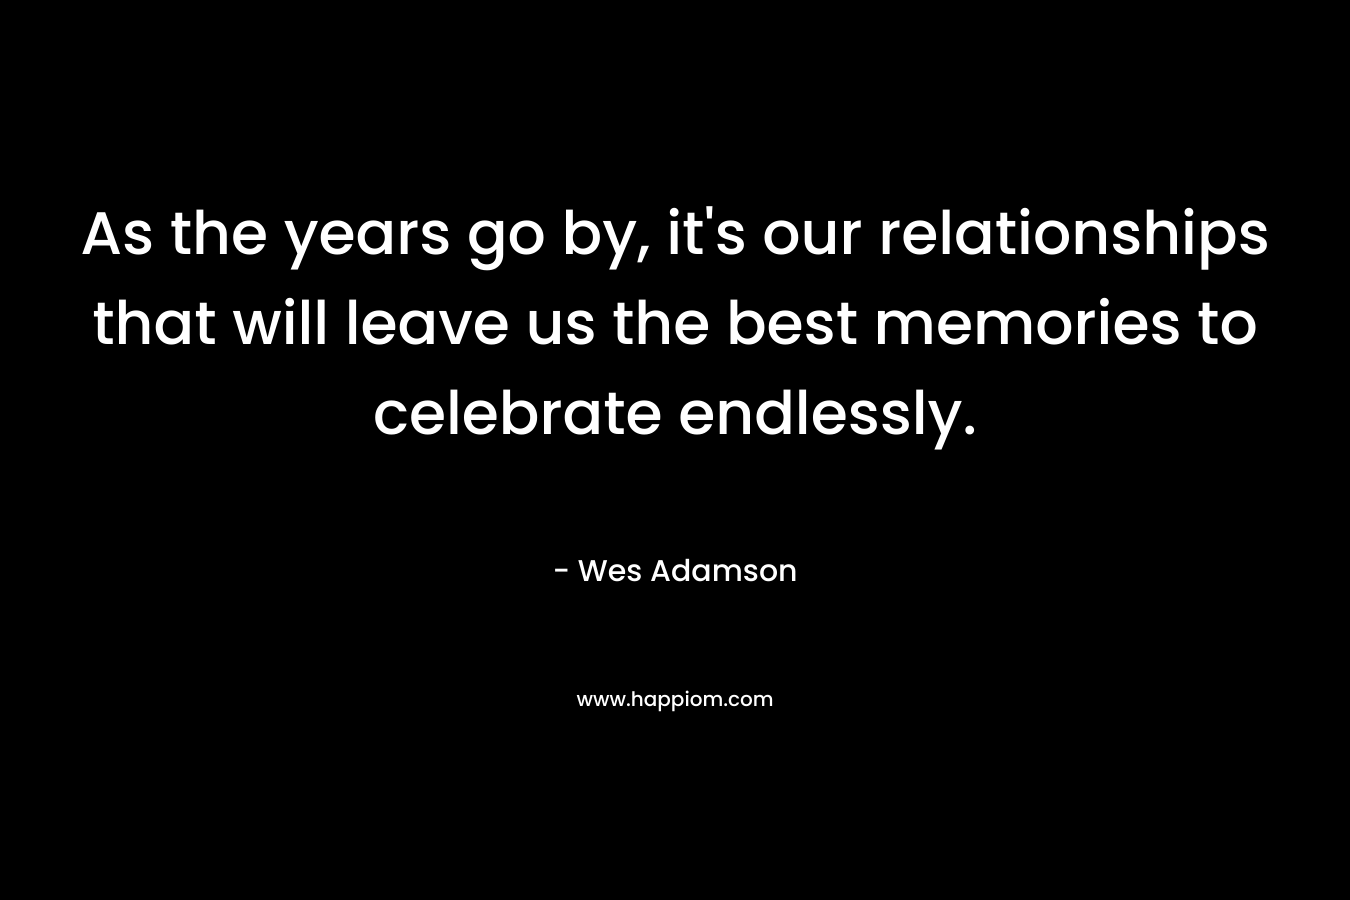 As the years go by, it’s our relationships that will leave us the best memories to celebrate endlessly. – Wes Adamson